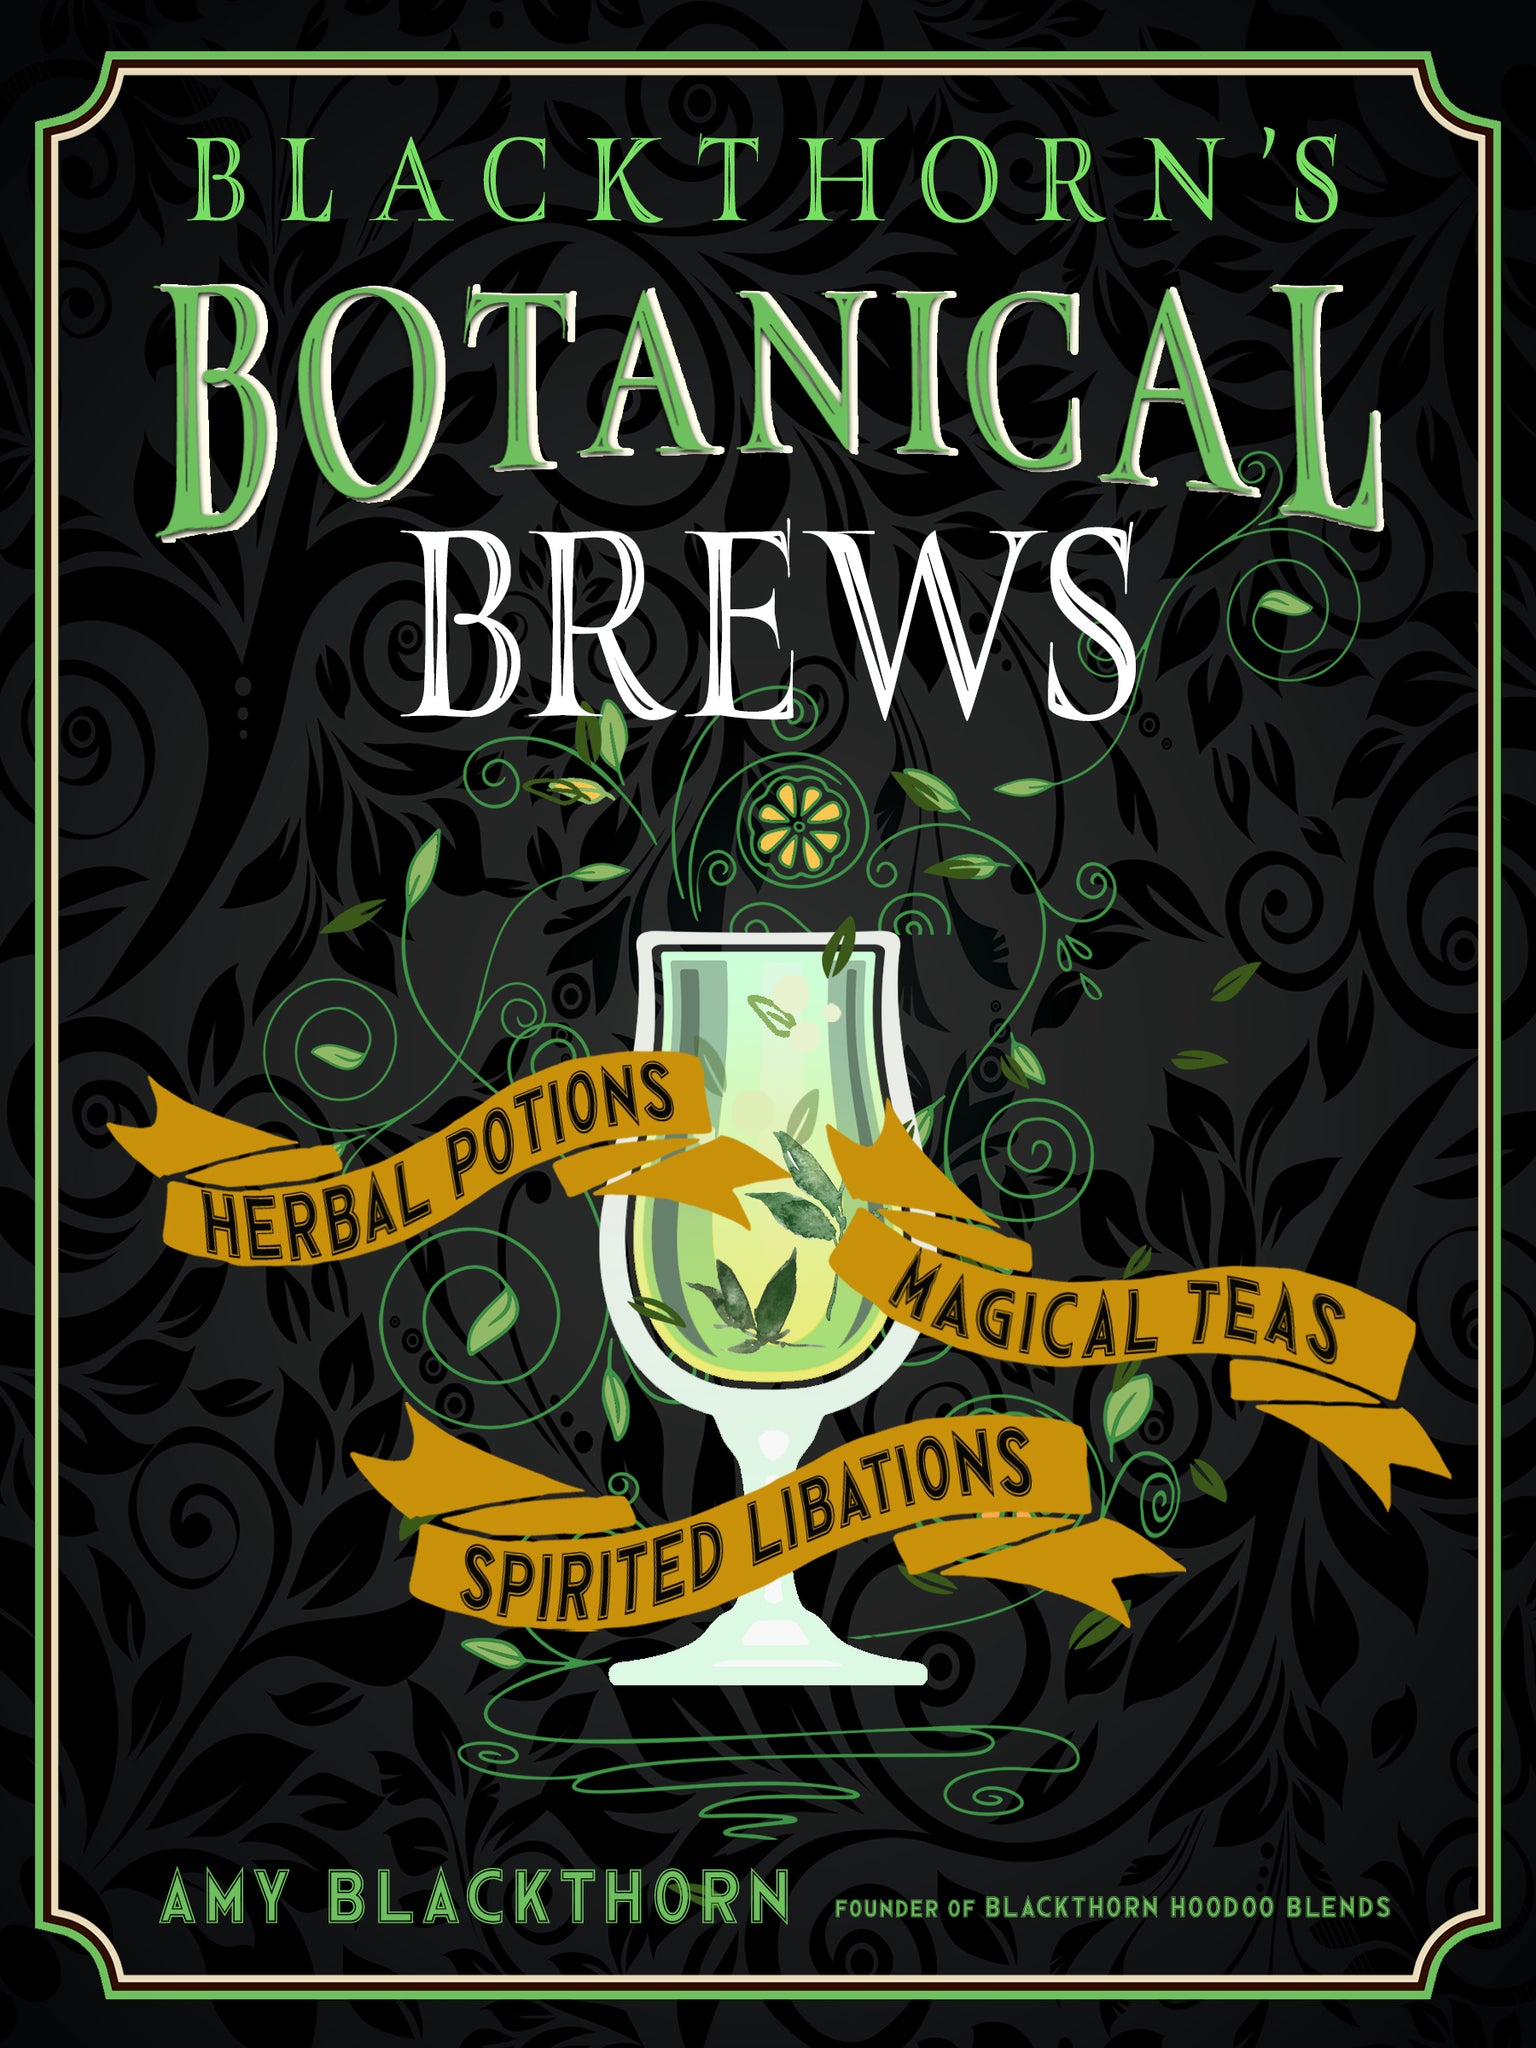 Blackthorns Botanical Brews Herbal Potions Magical Teas and Spirited Libations by Amy Blackthorn